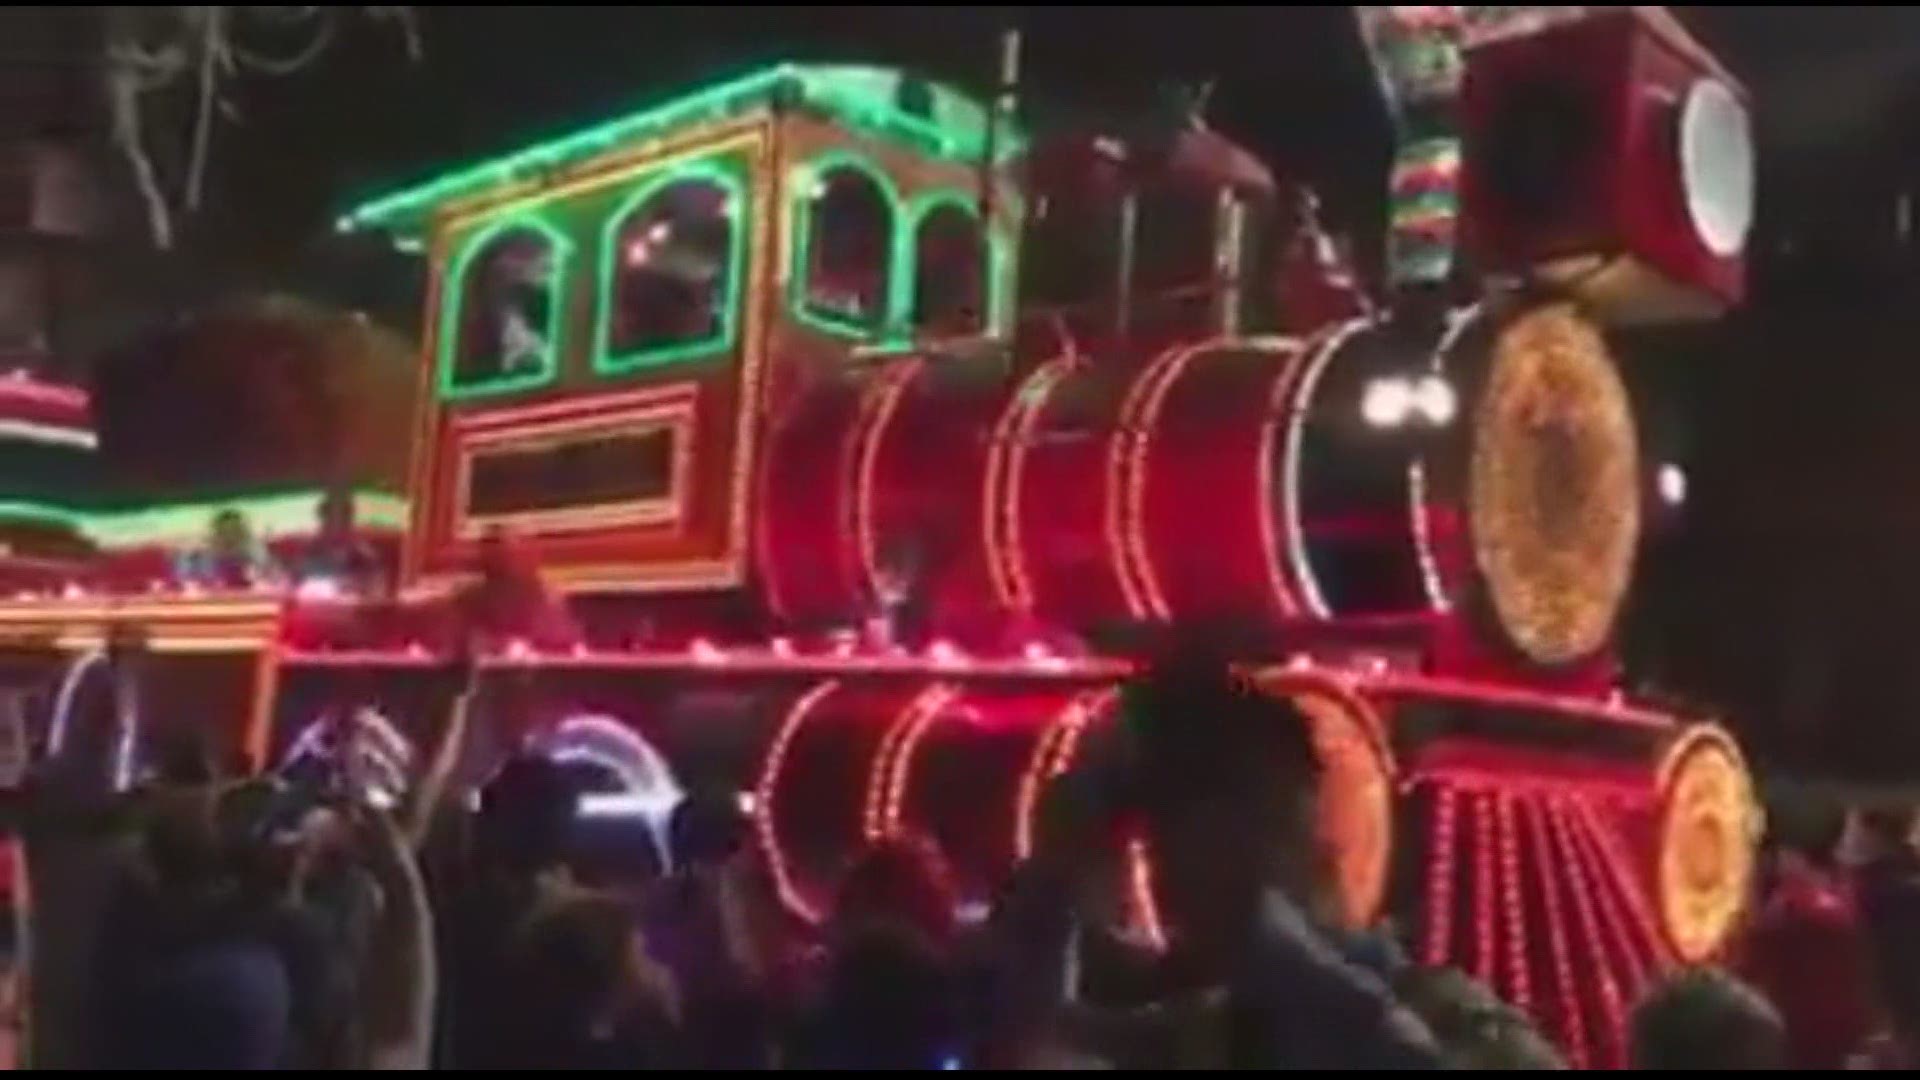 One of the longest floats in all of Carnival, the Smokey Mary from the Krewe of Orpheus, will be on display again on Lundi Gras night.